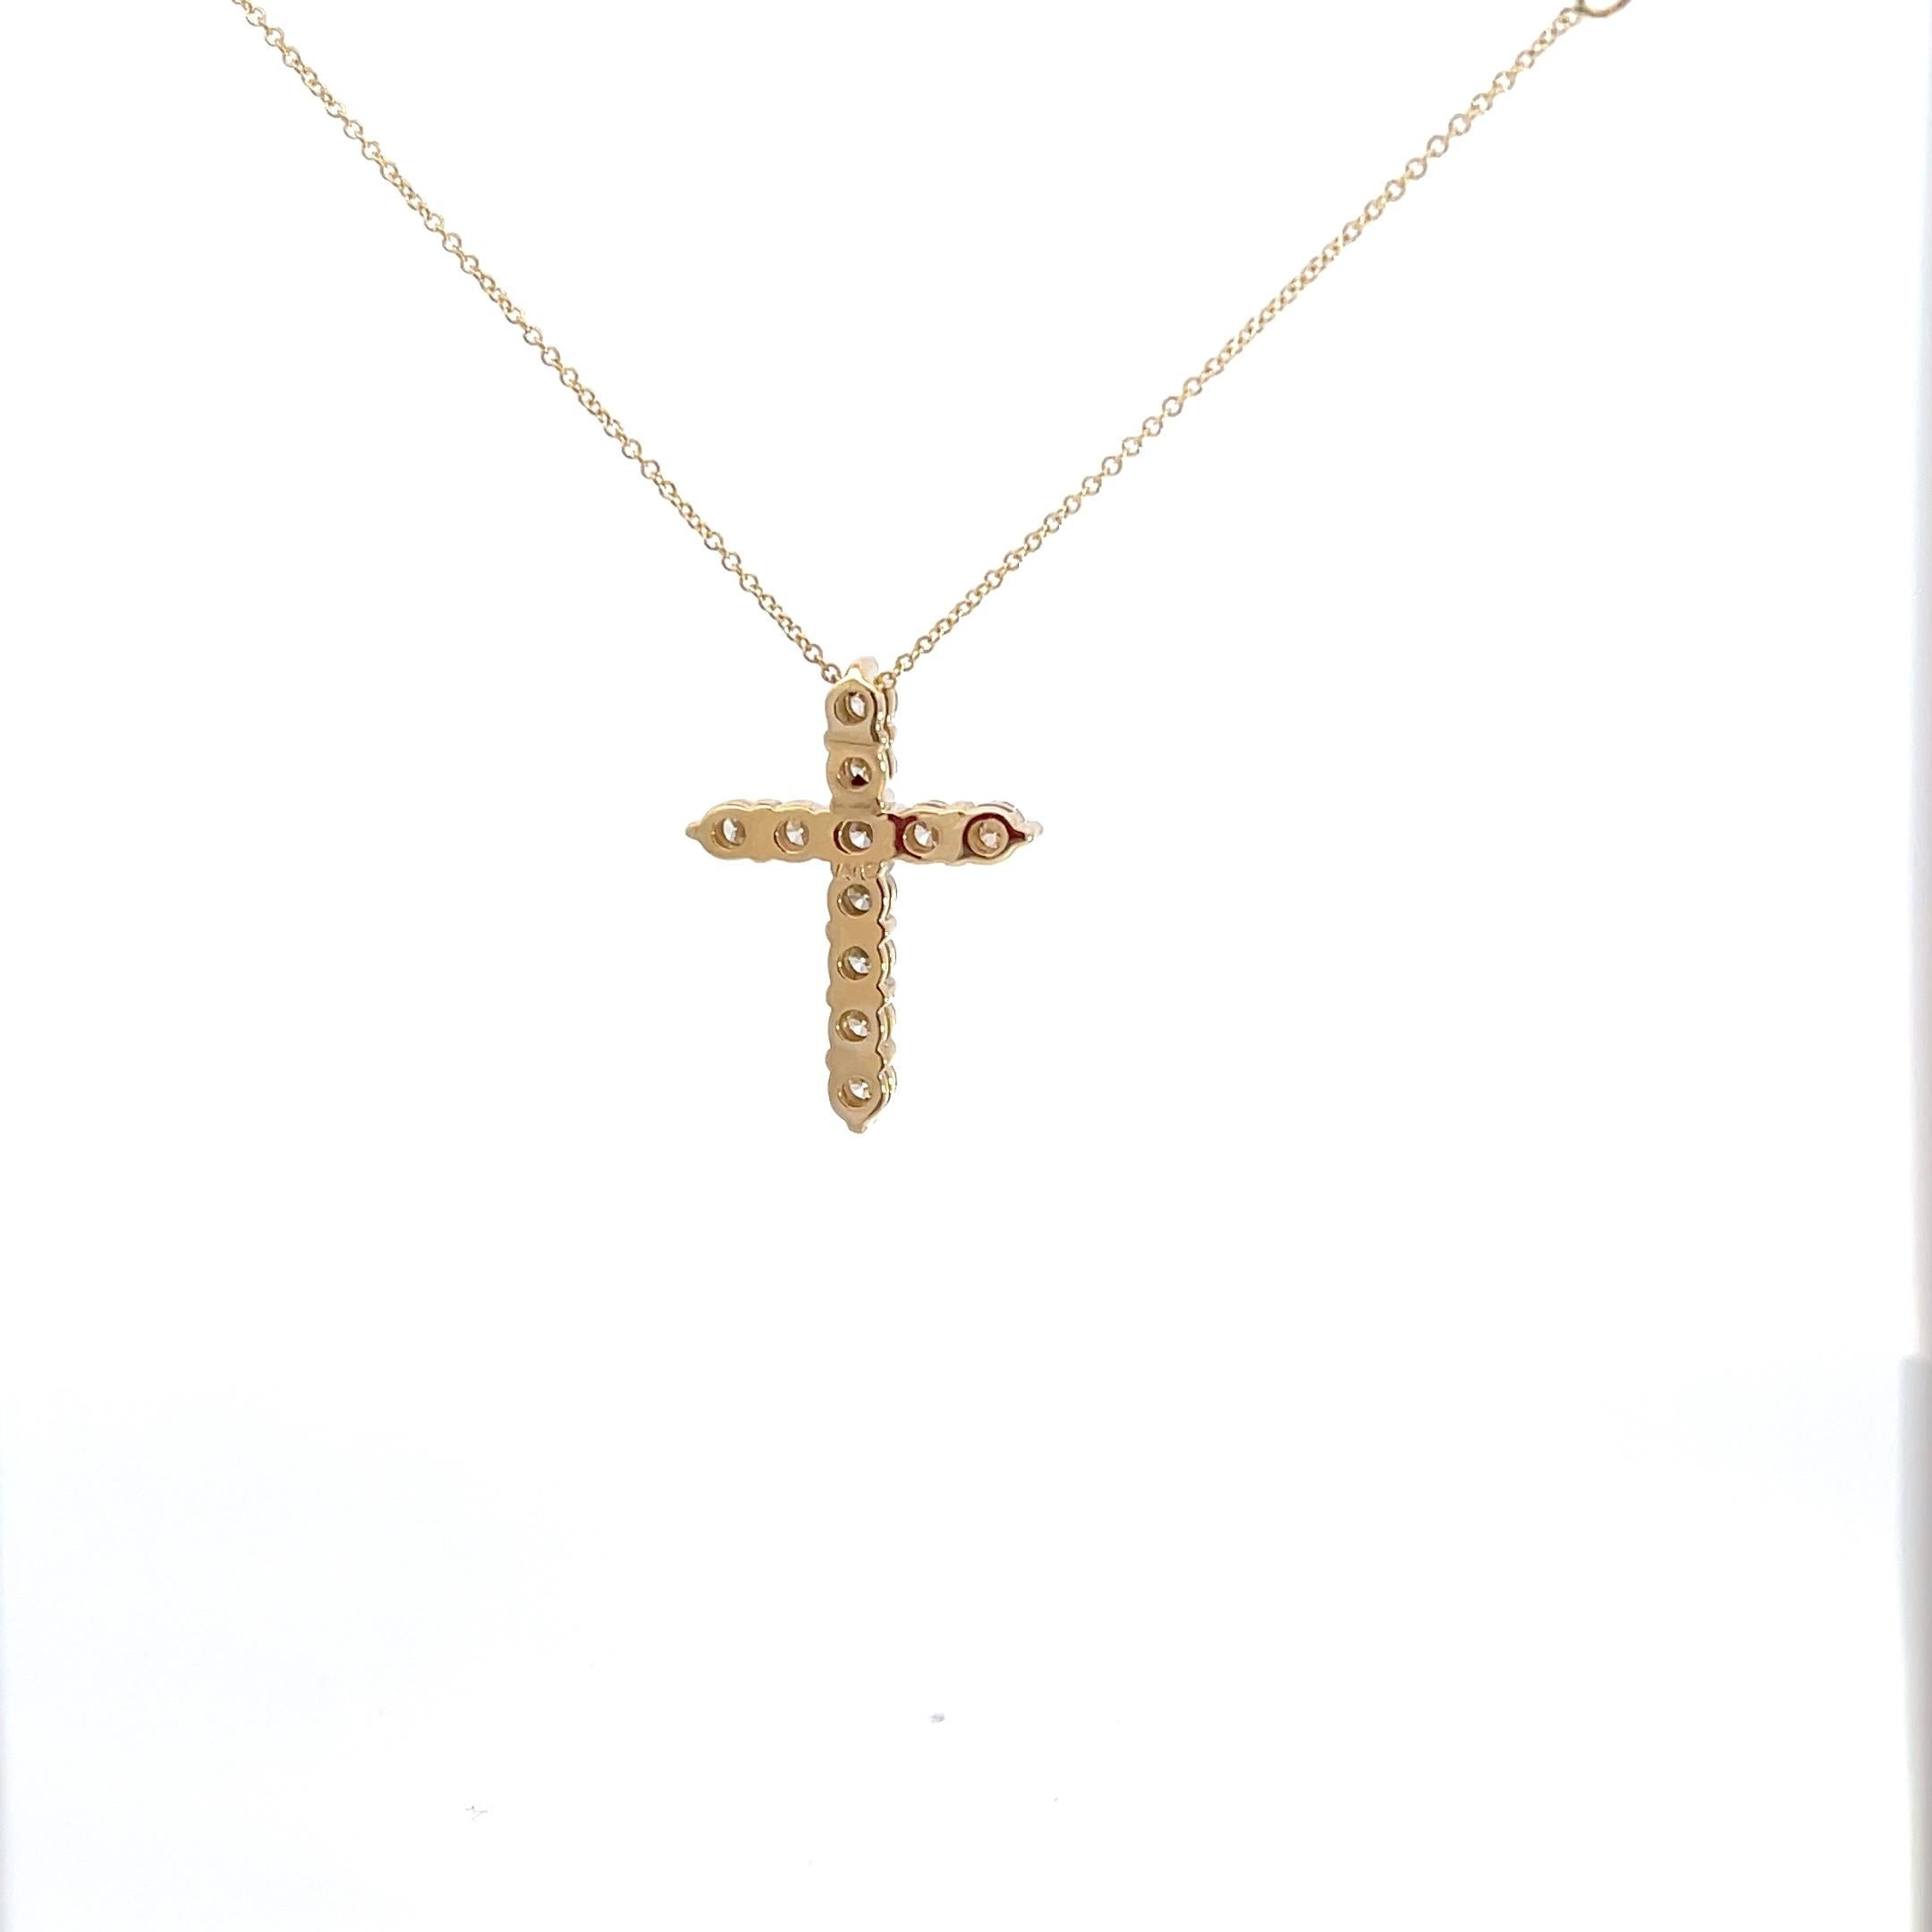 Introducing an exquisite symbol of faith and elegance, behold the mesmerizing 14K Yellow Gold 1 1/6 carat Diamond Cross Pendant. Crafted with meticulous attention to detail, this stunning piece showcases the timeless allure of a classic cross